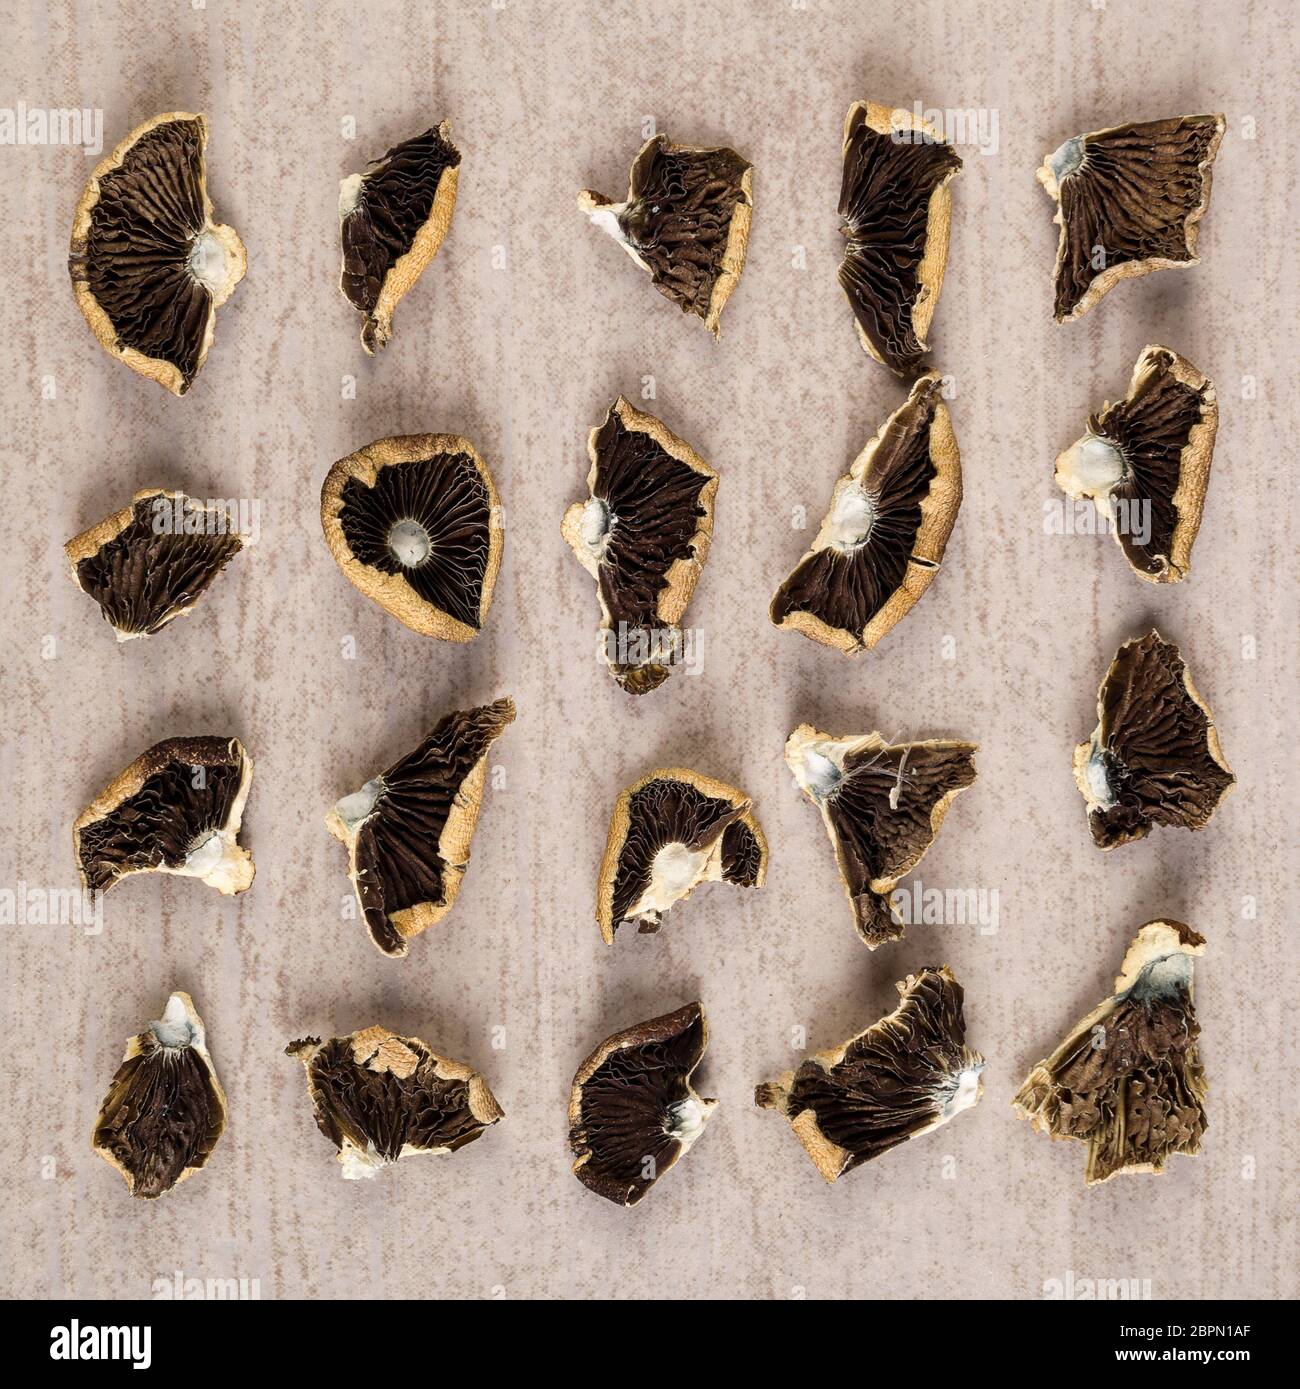 Dried magic mushrooms from above. Knolling flat lay background. Entheogen, alternative medicine. Stock Photo